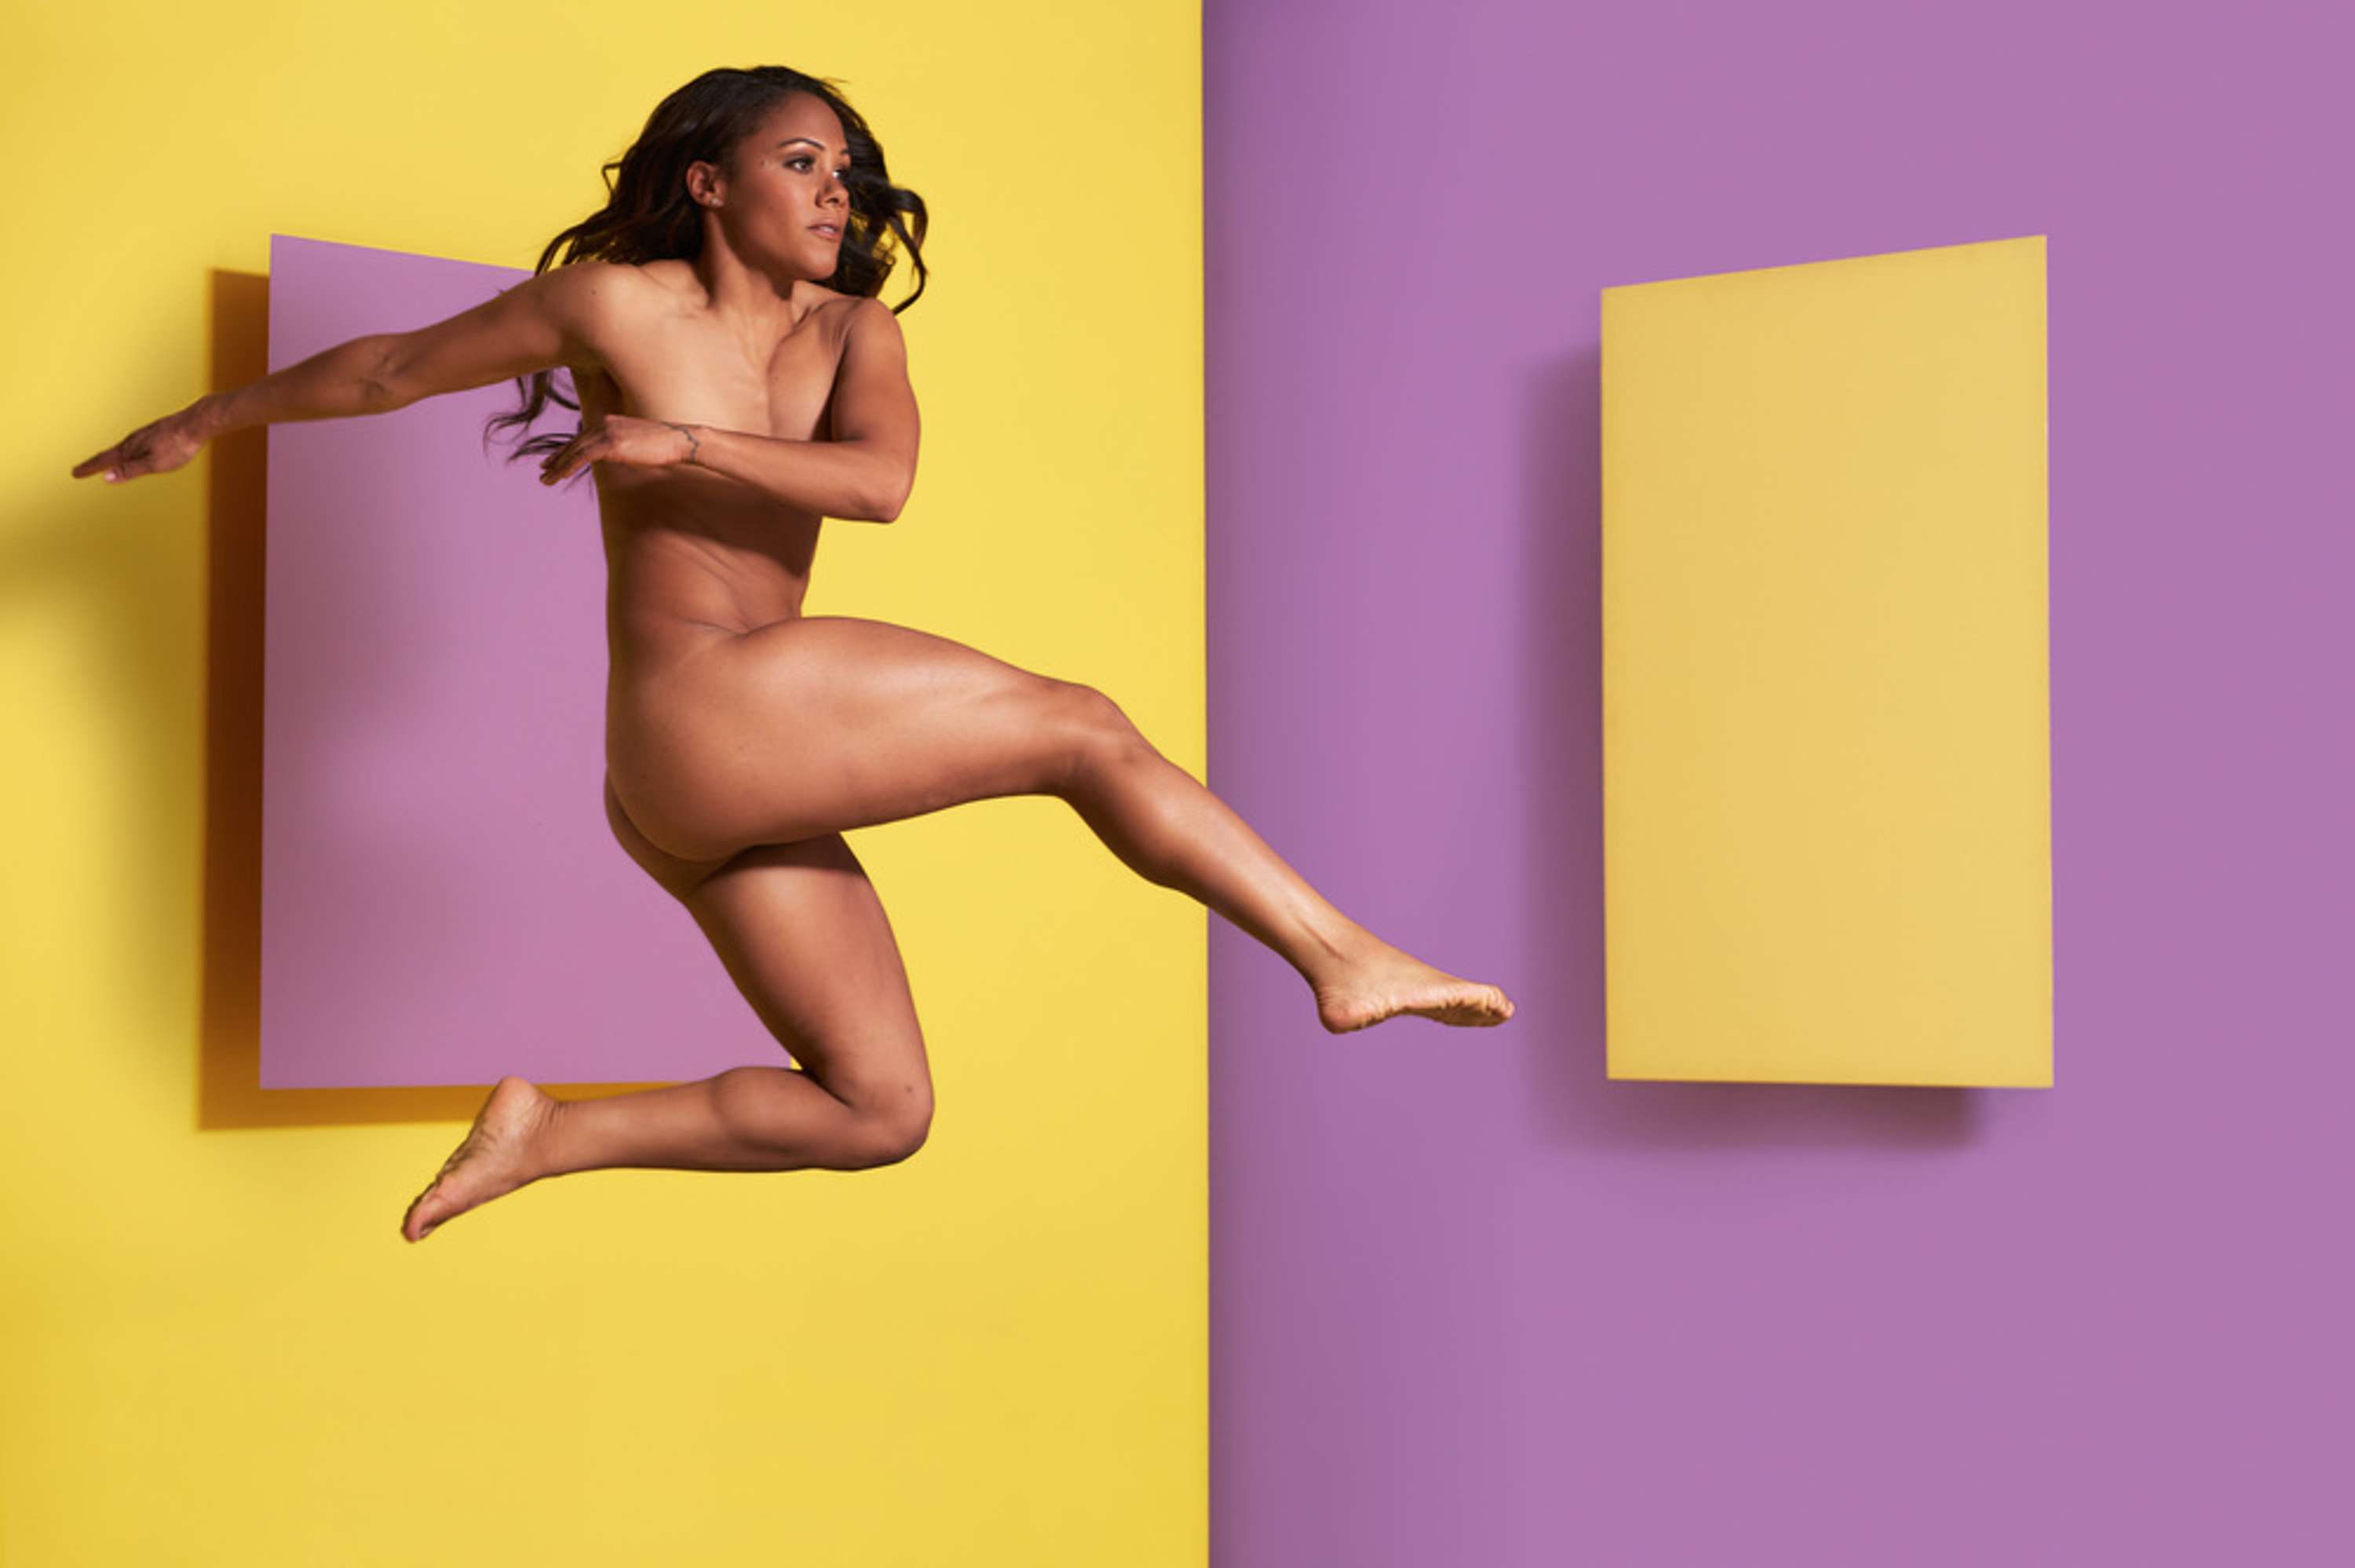 Women's Health: Naked Issue 2016 by WrightJ.